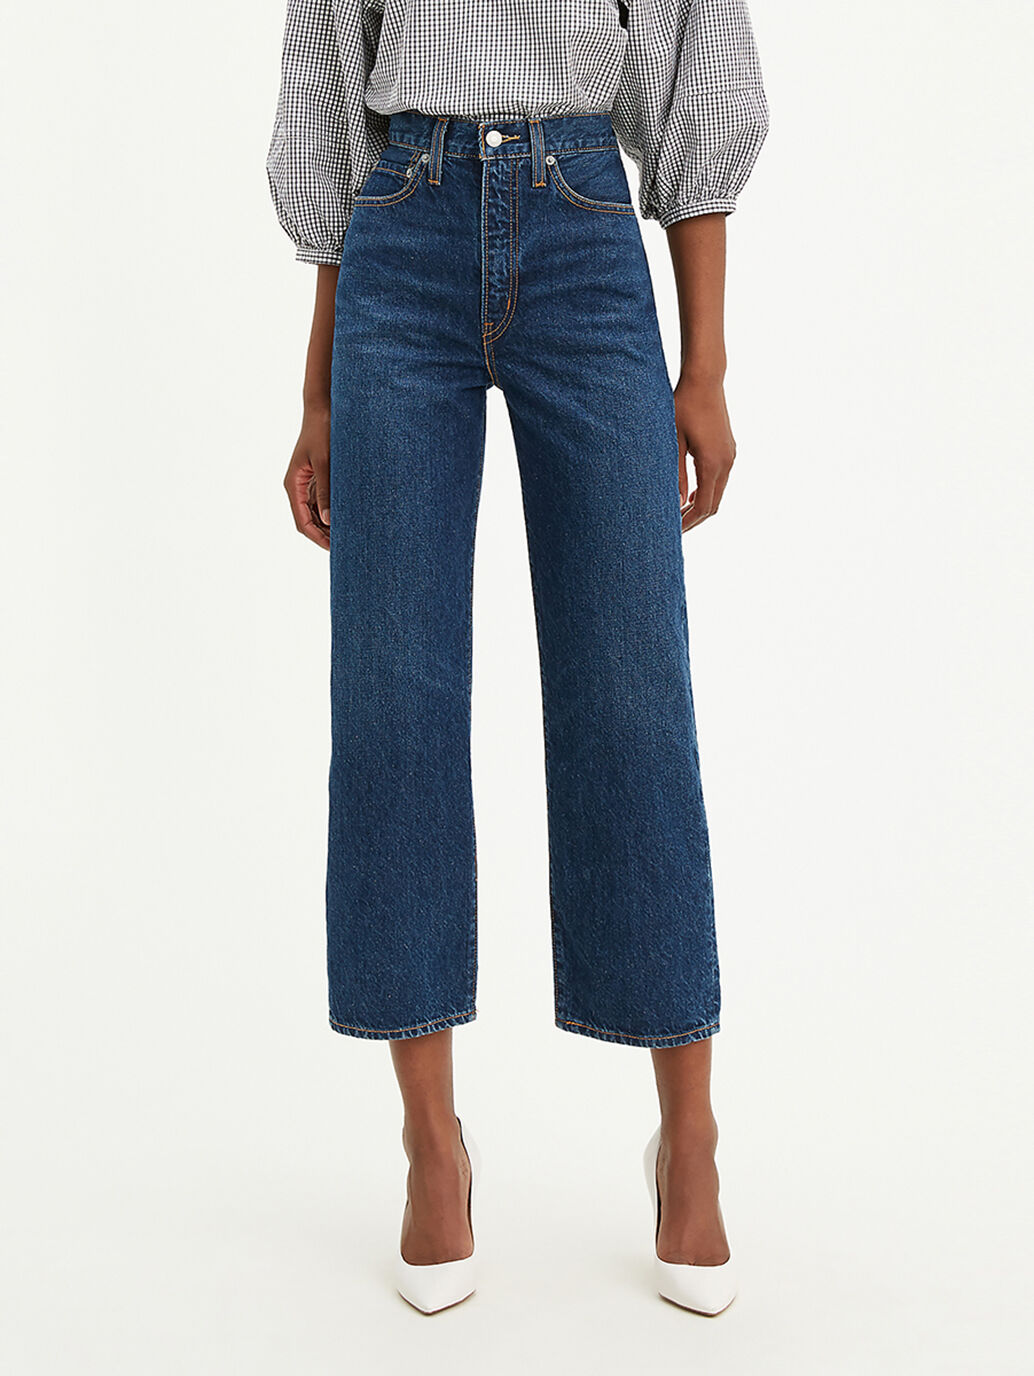 rib cage high rise jeans